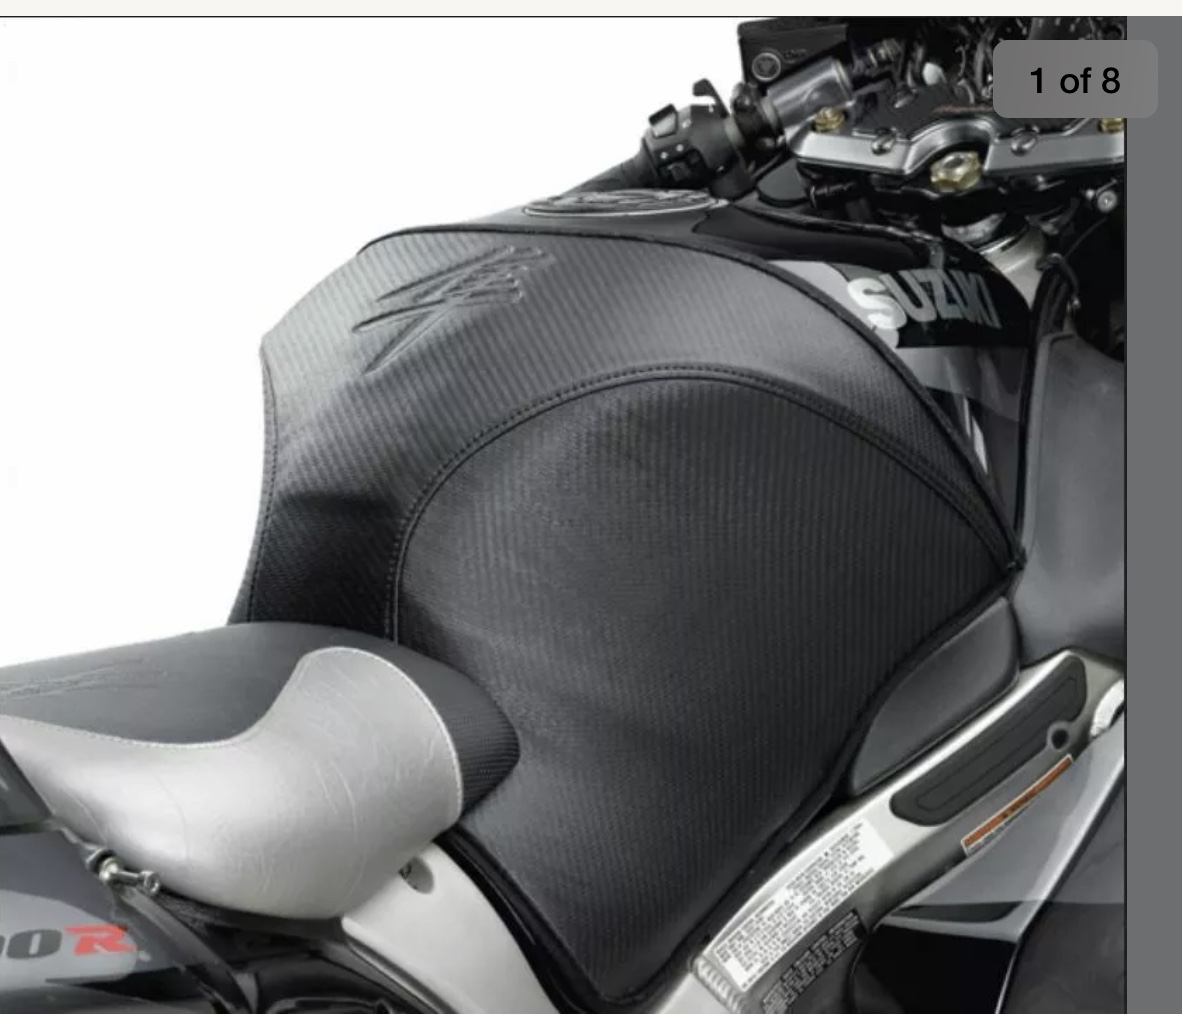 Tank Cover for Gen I Busa, General Bike Related Topics